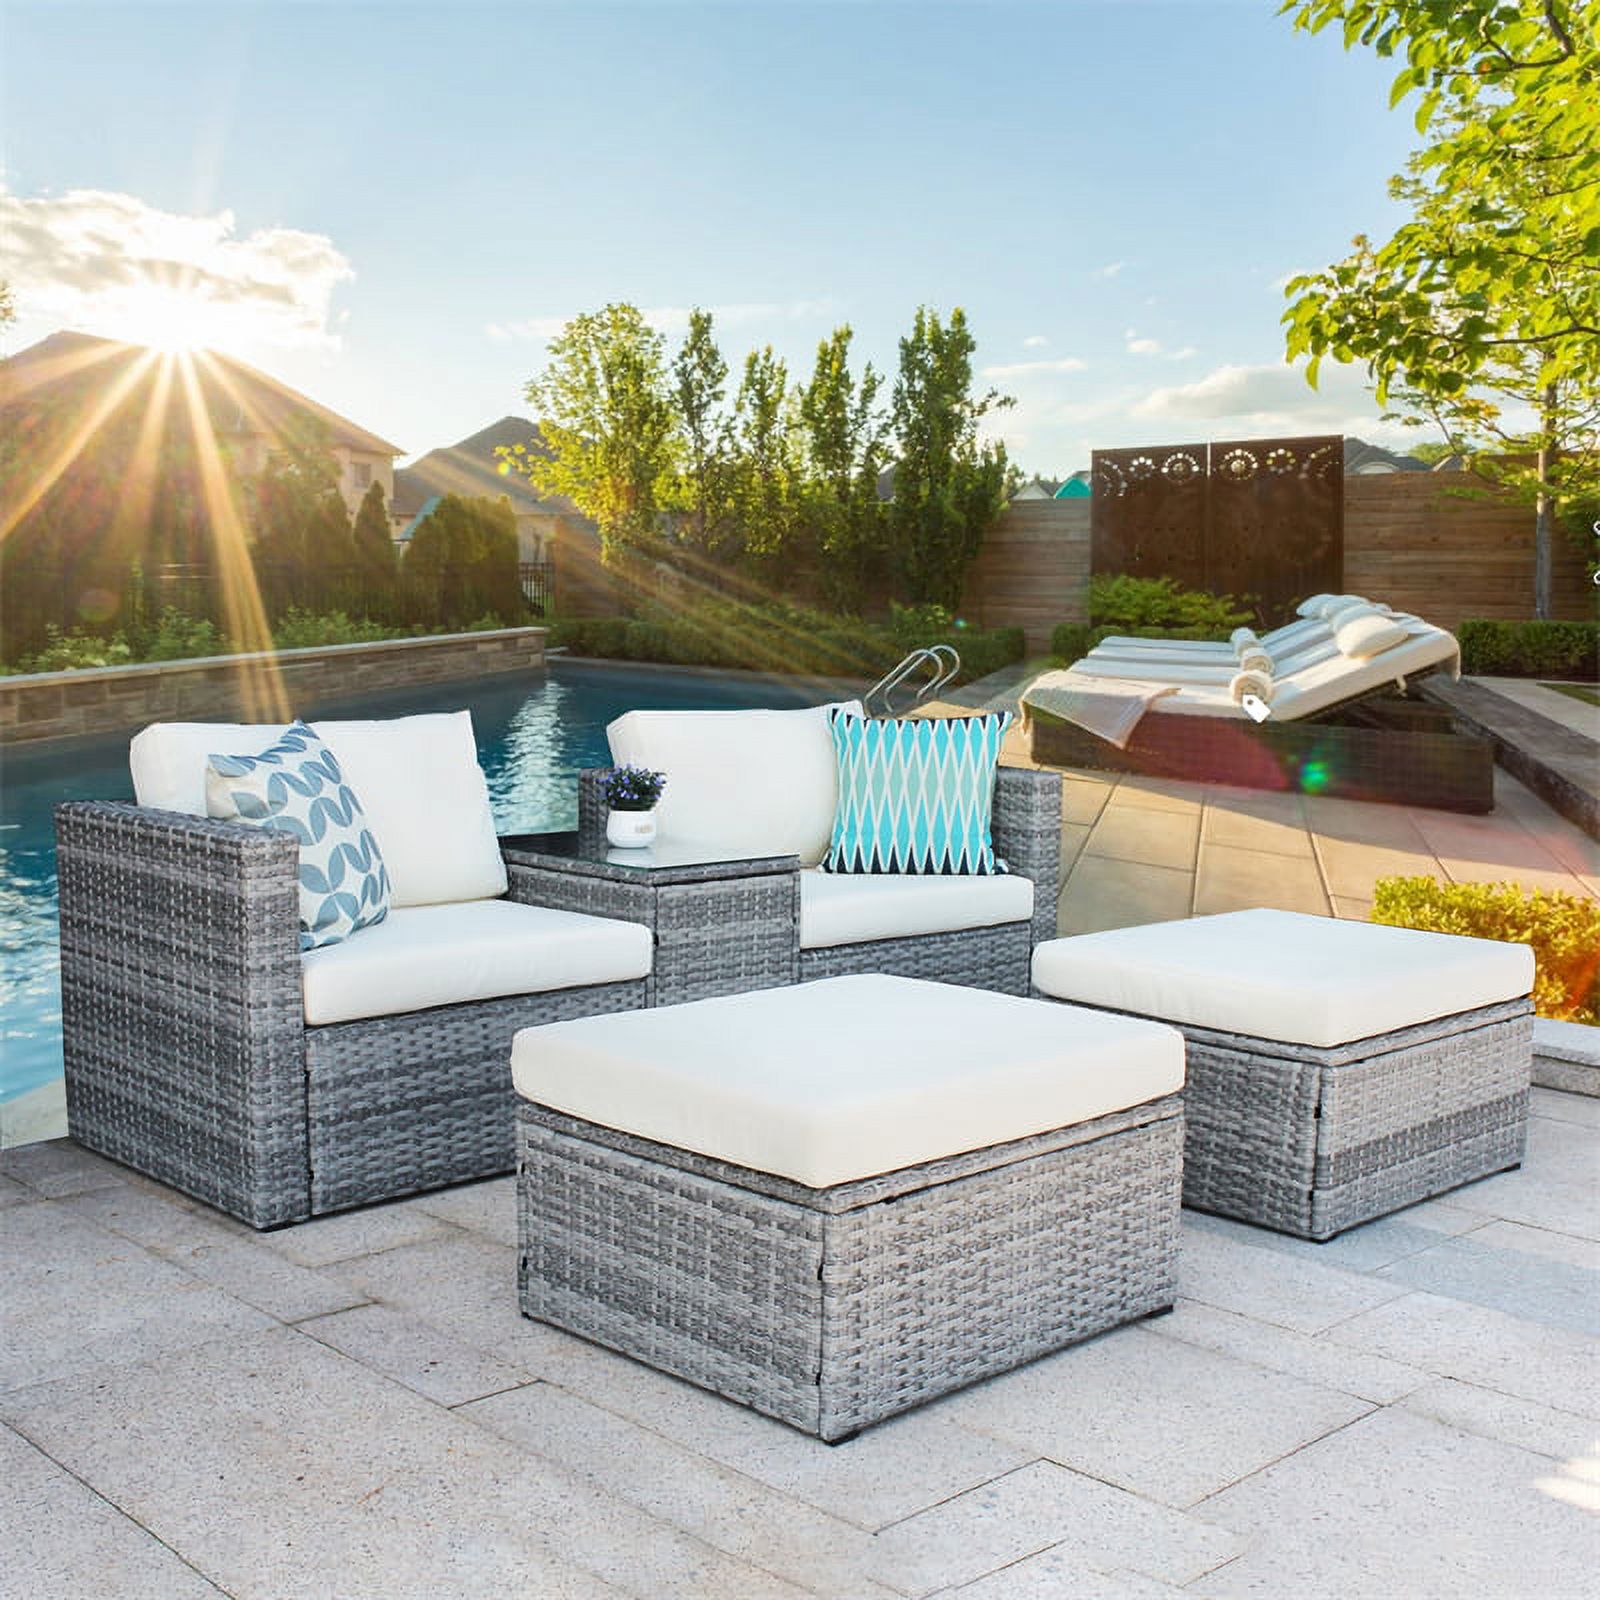 5 Pieces Outdoor Patio Sectional Sofa Set, Gray Rattan and Beige Cushion with Weather Protecting Cover, Patio Sofa Sets with 2 Rattan Chairs, 2 Pieces Patio Rattan Ottomans and Coffee Table - image 2 of 7